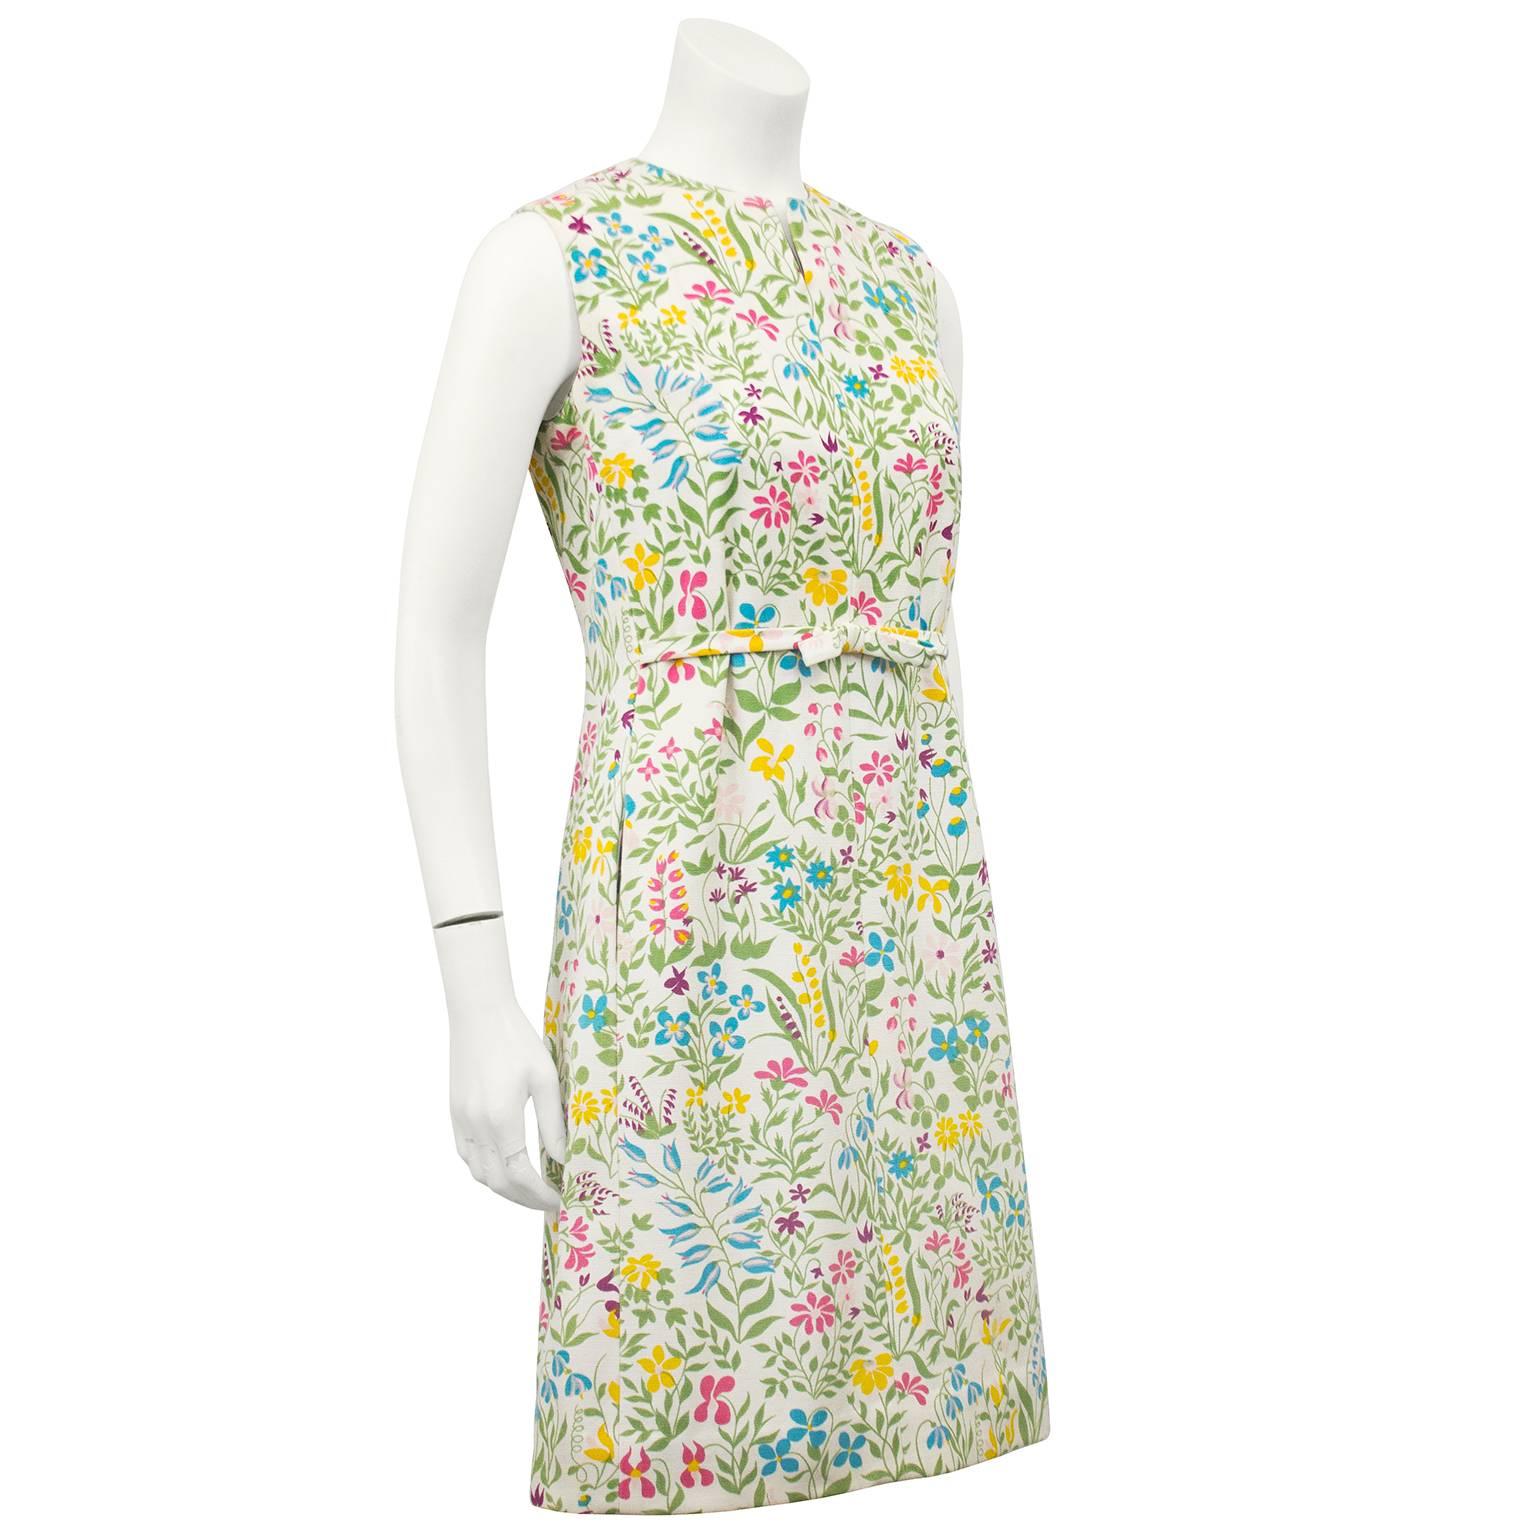 Cute as a button 1960s Boussac of France cotton day dress from the 1960s. Best known for the Pierre Frey printed cotton fabrics these Boussac dresses are collectible, timeless and fun to wear. Stunning bright floral print on a cream background.